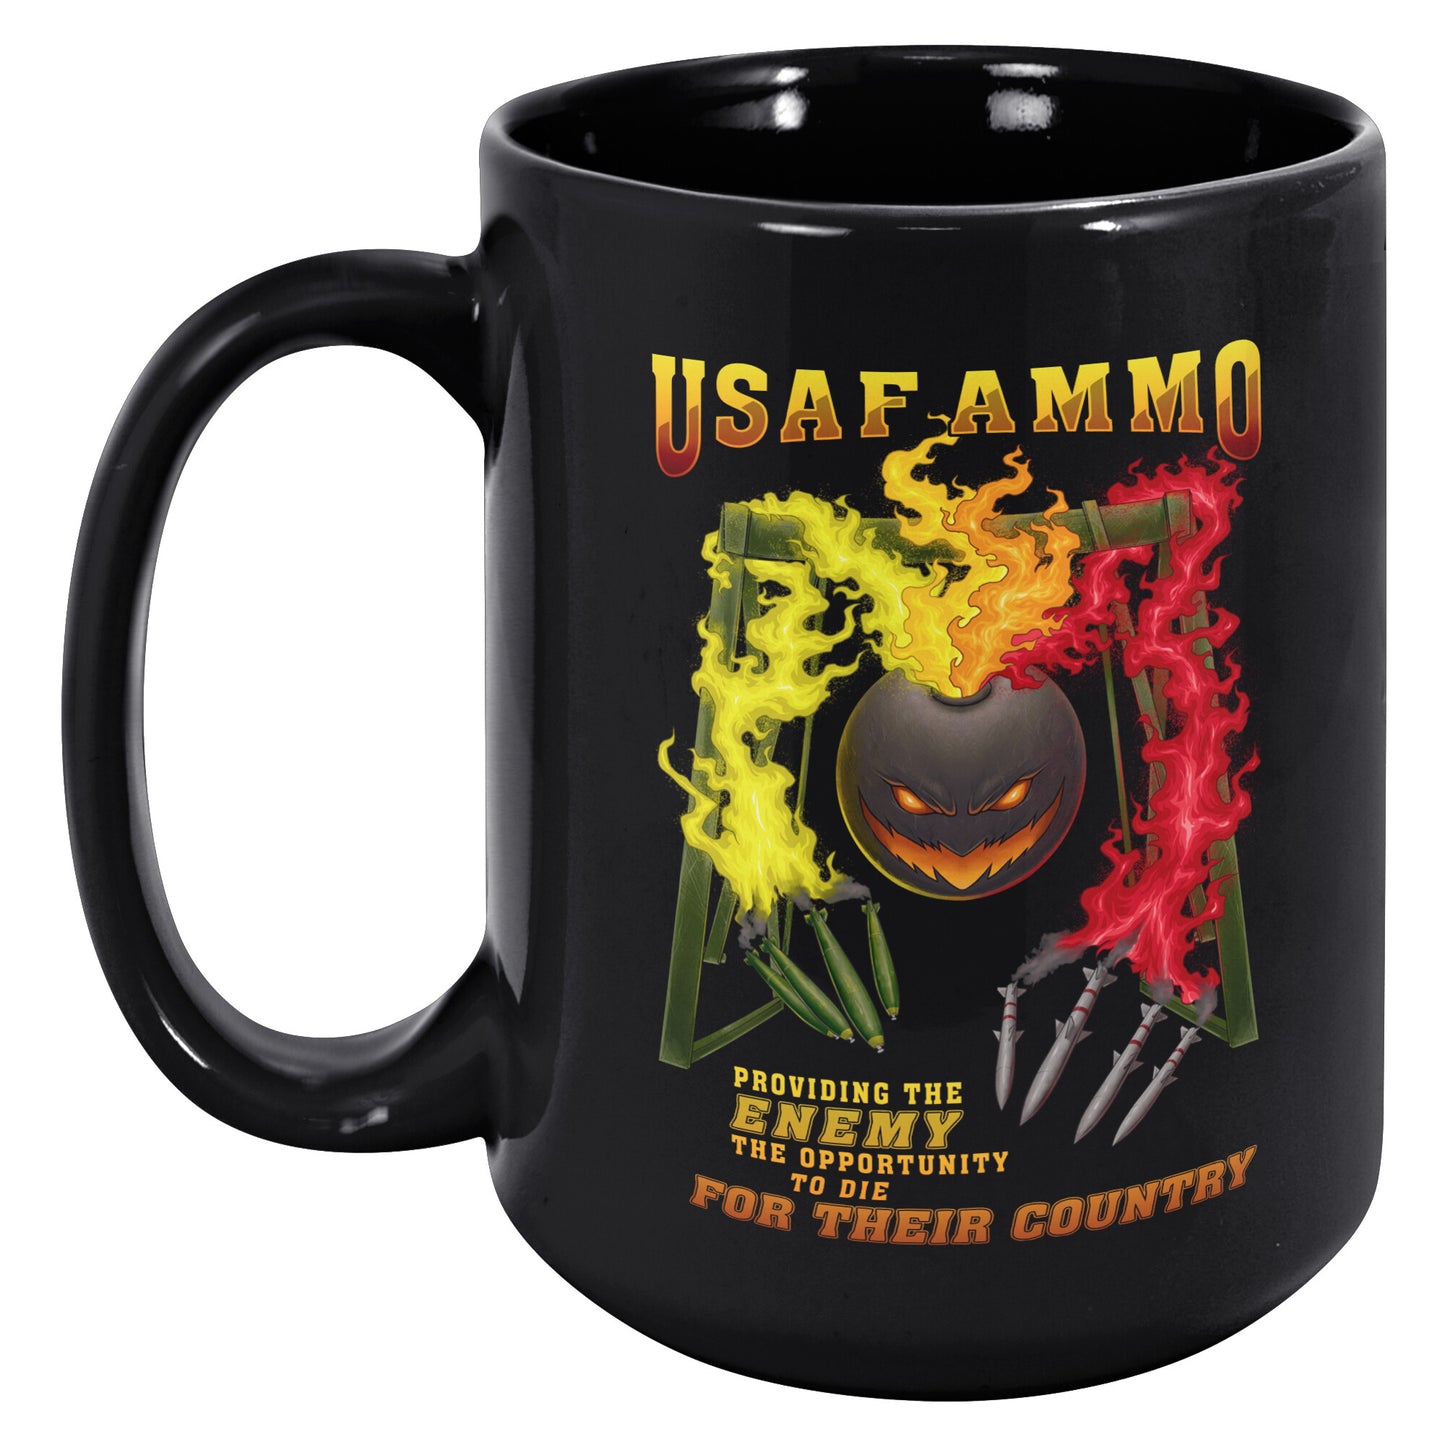 AMMO Flaming Pisspot Fire Arms Gantry Bomb and Missile Fingers black 15oz coffee mug